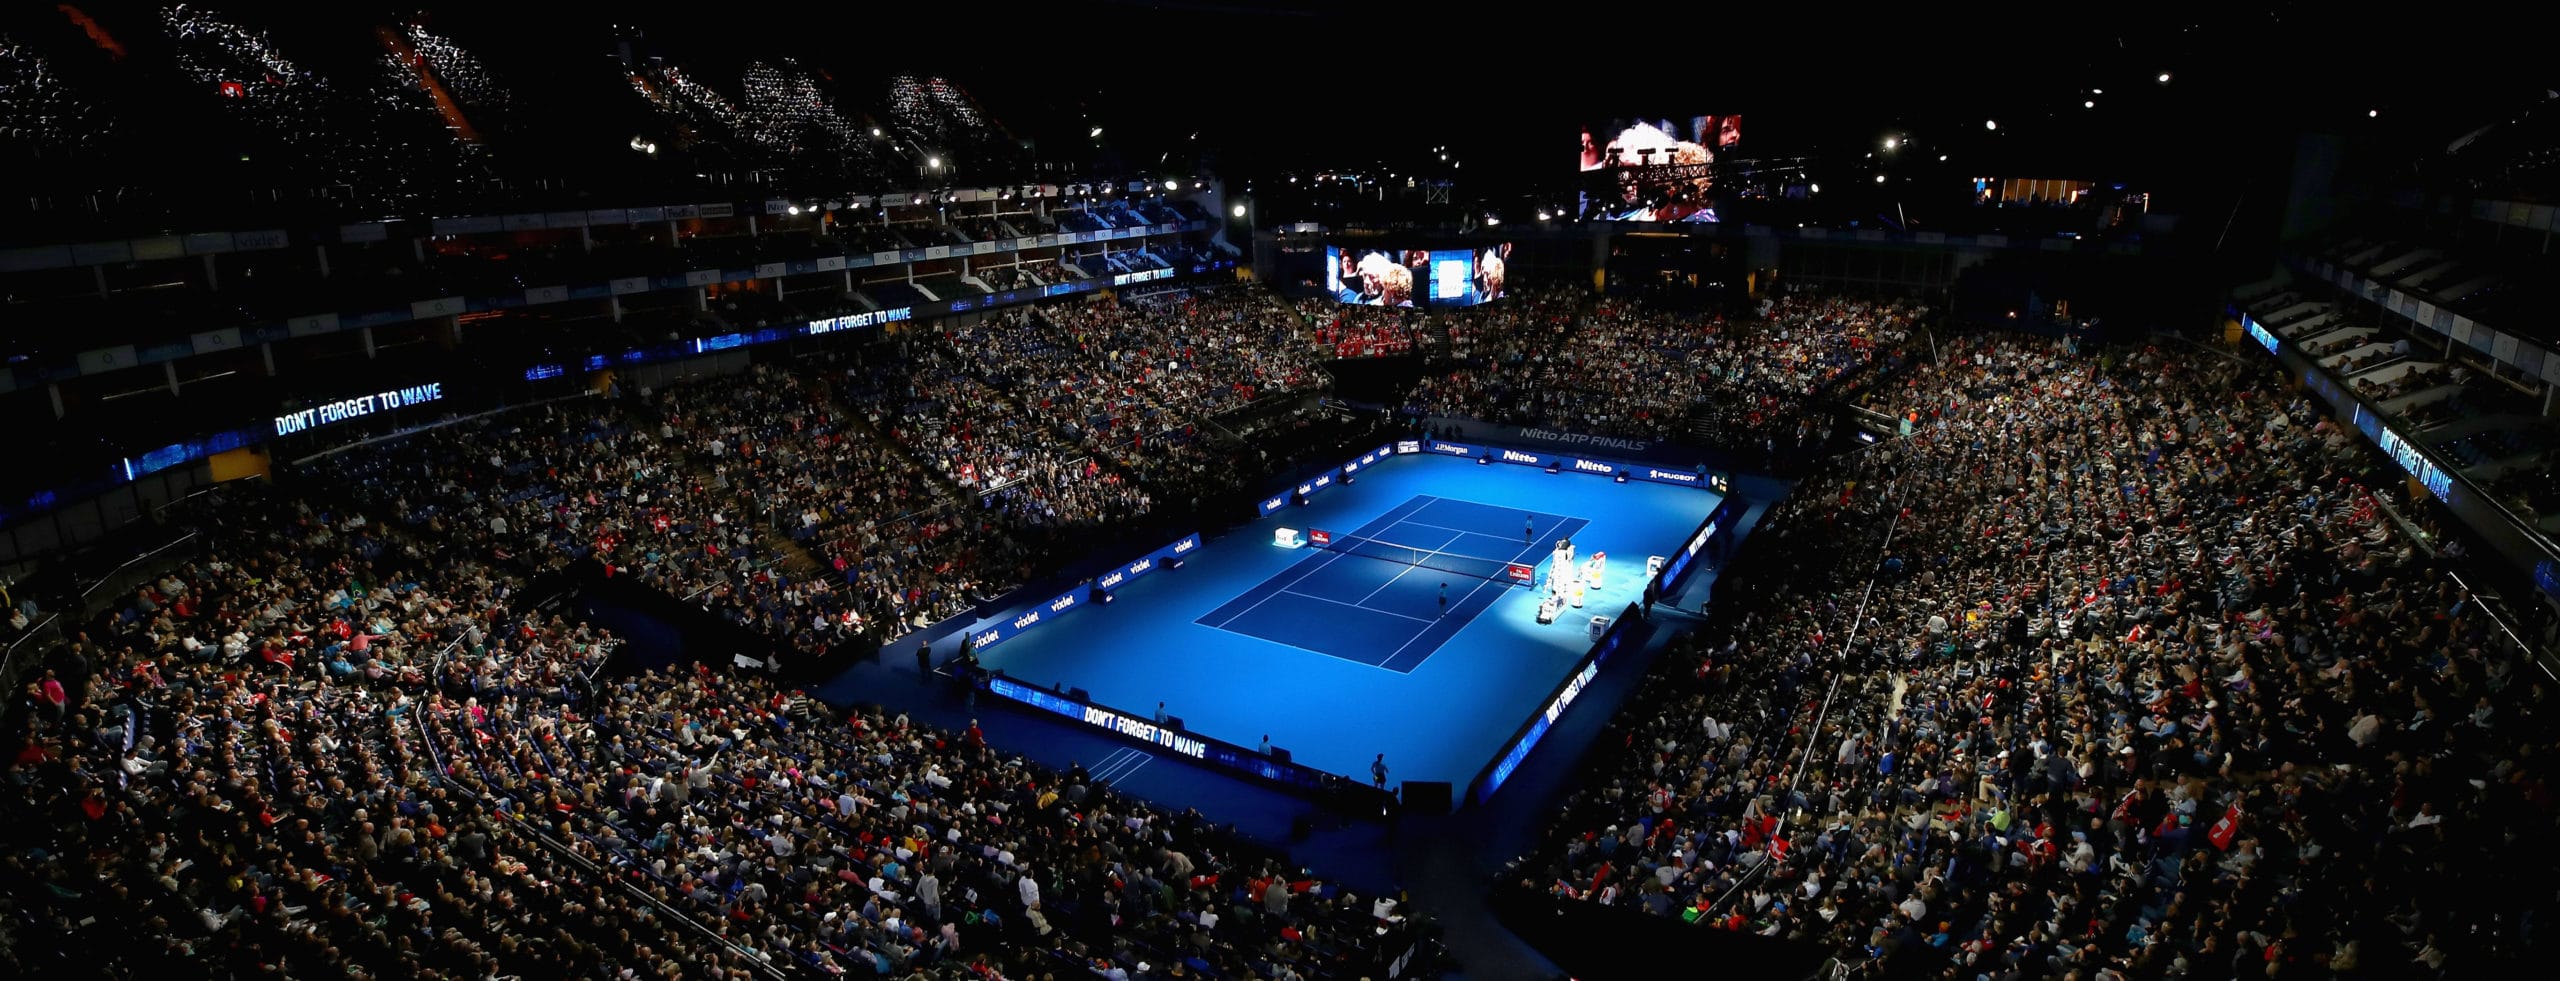 End of an era: Who will win the 2020 ATP Finals?